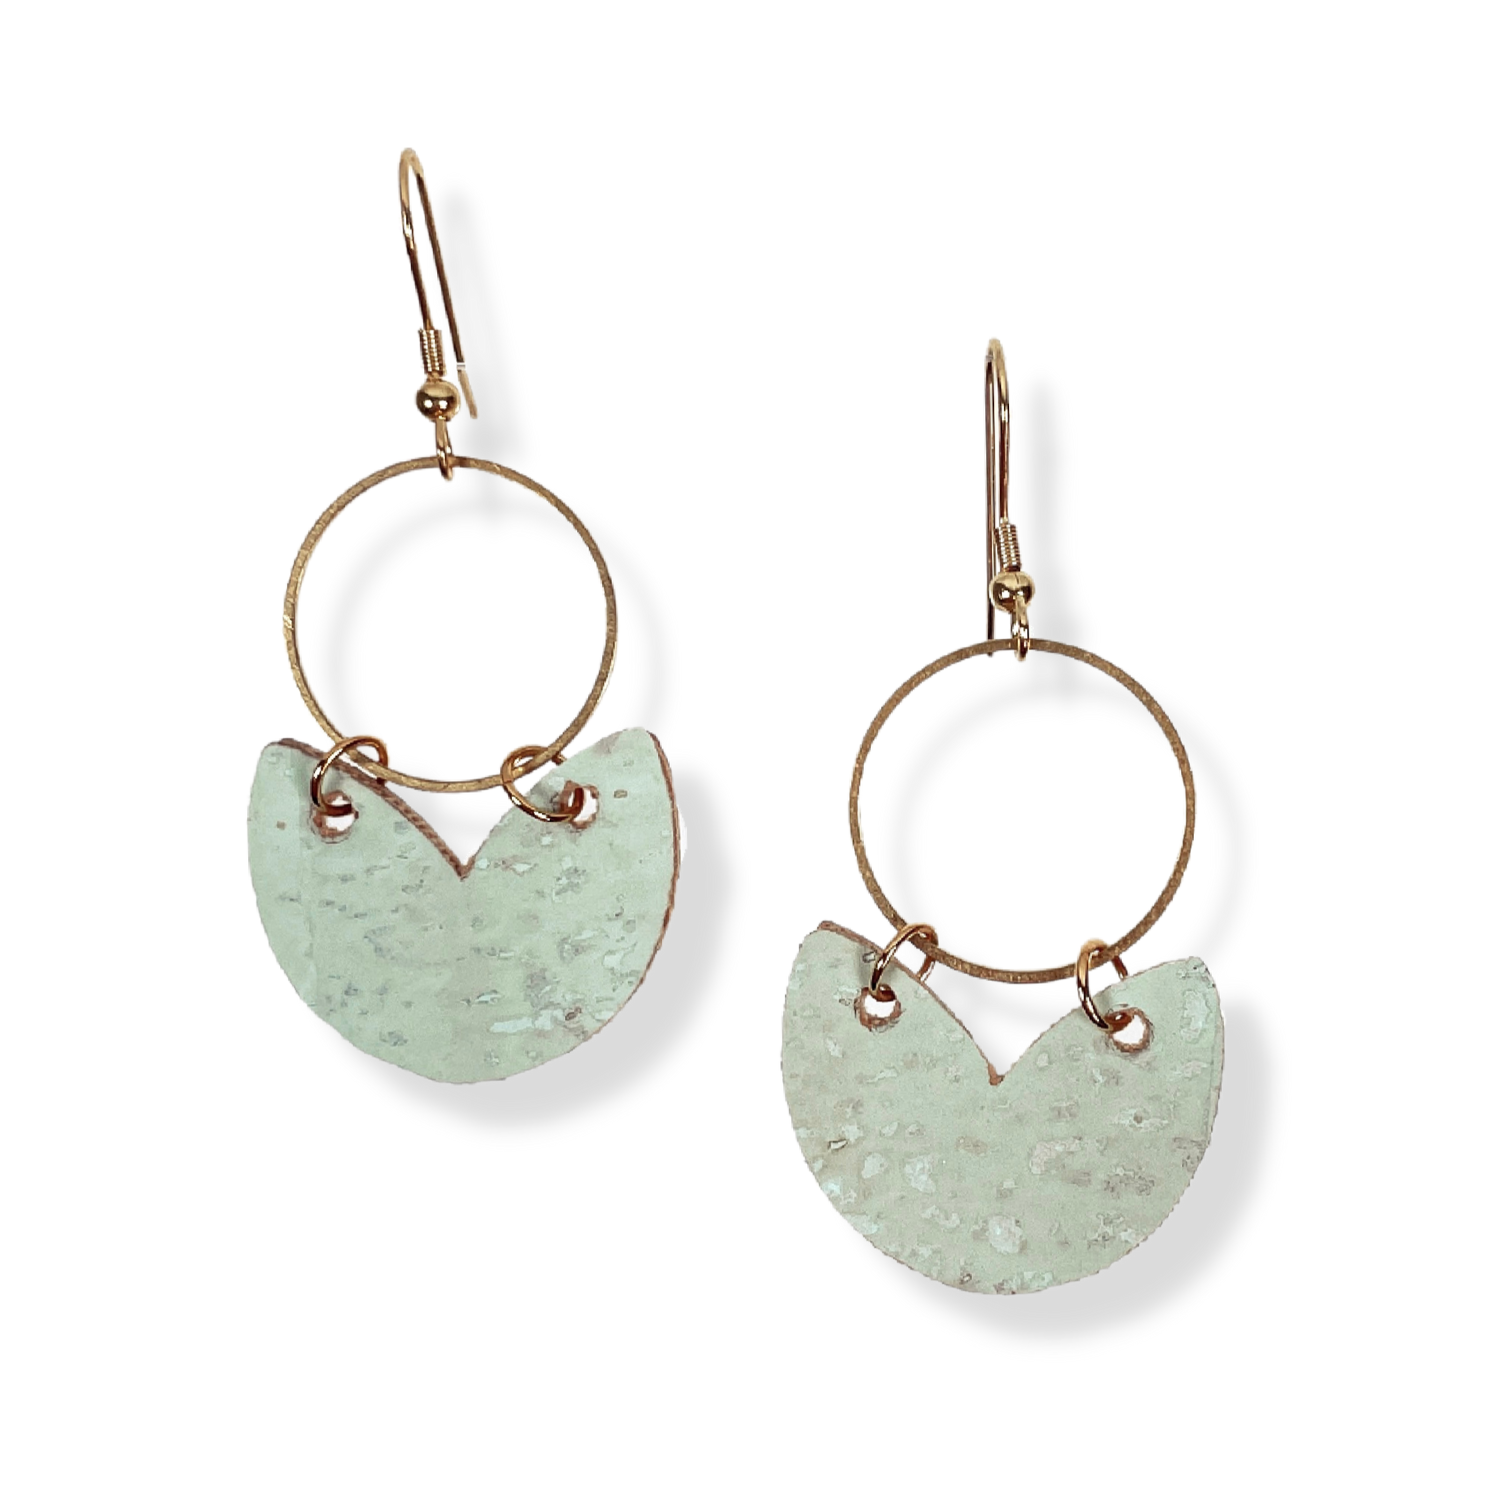 Amelia Cork and Gold Accent Dangly Earrings-Teal